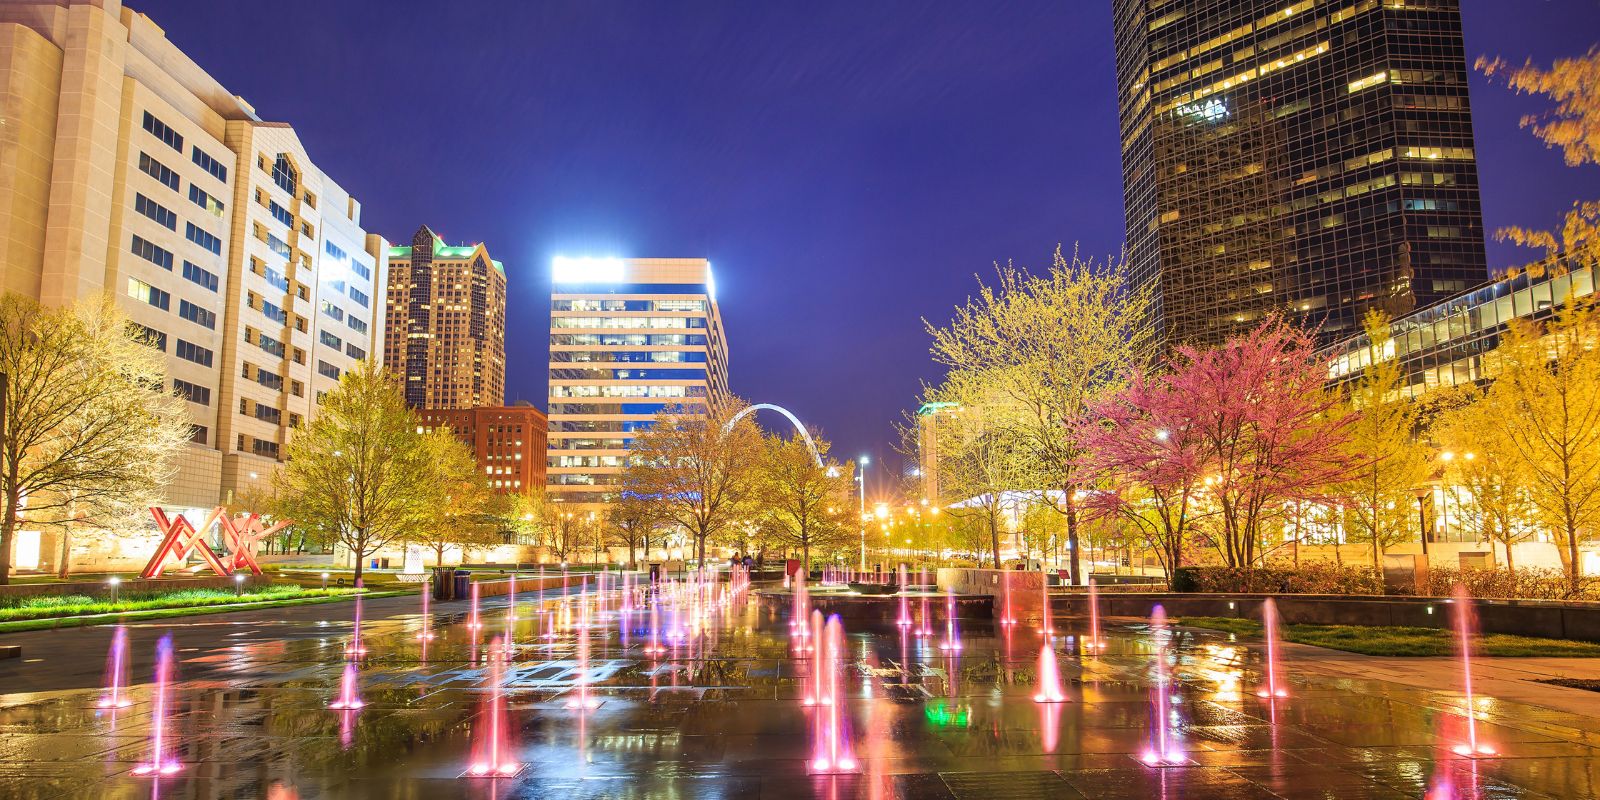 Citygarden lights up St. Louis' downtown core at night.